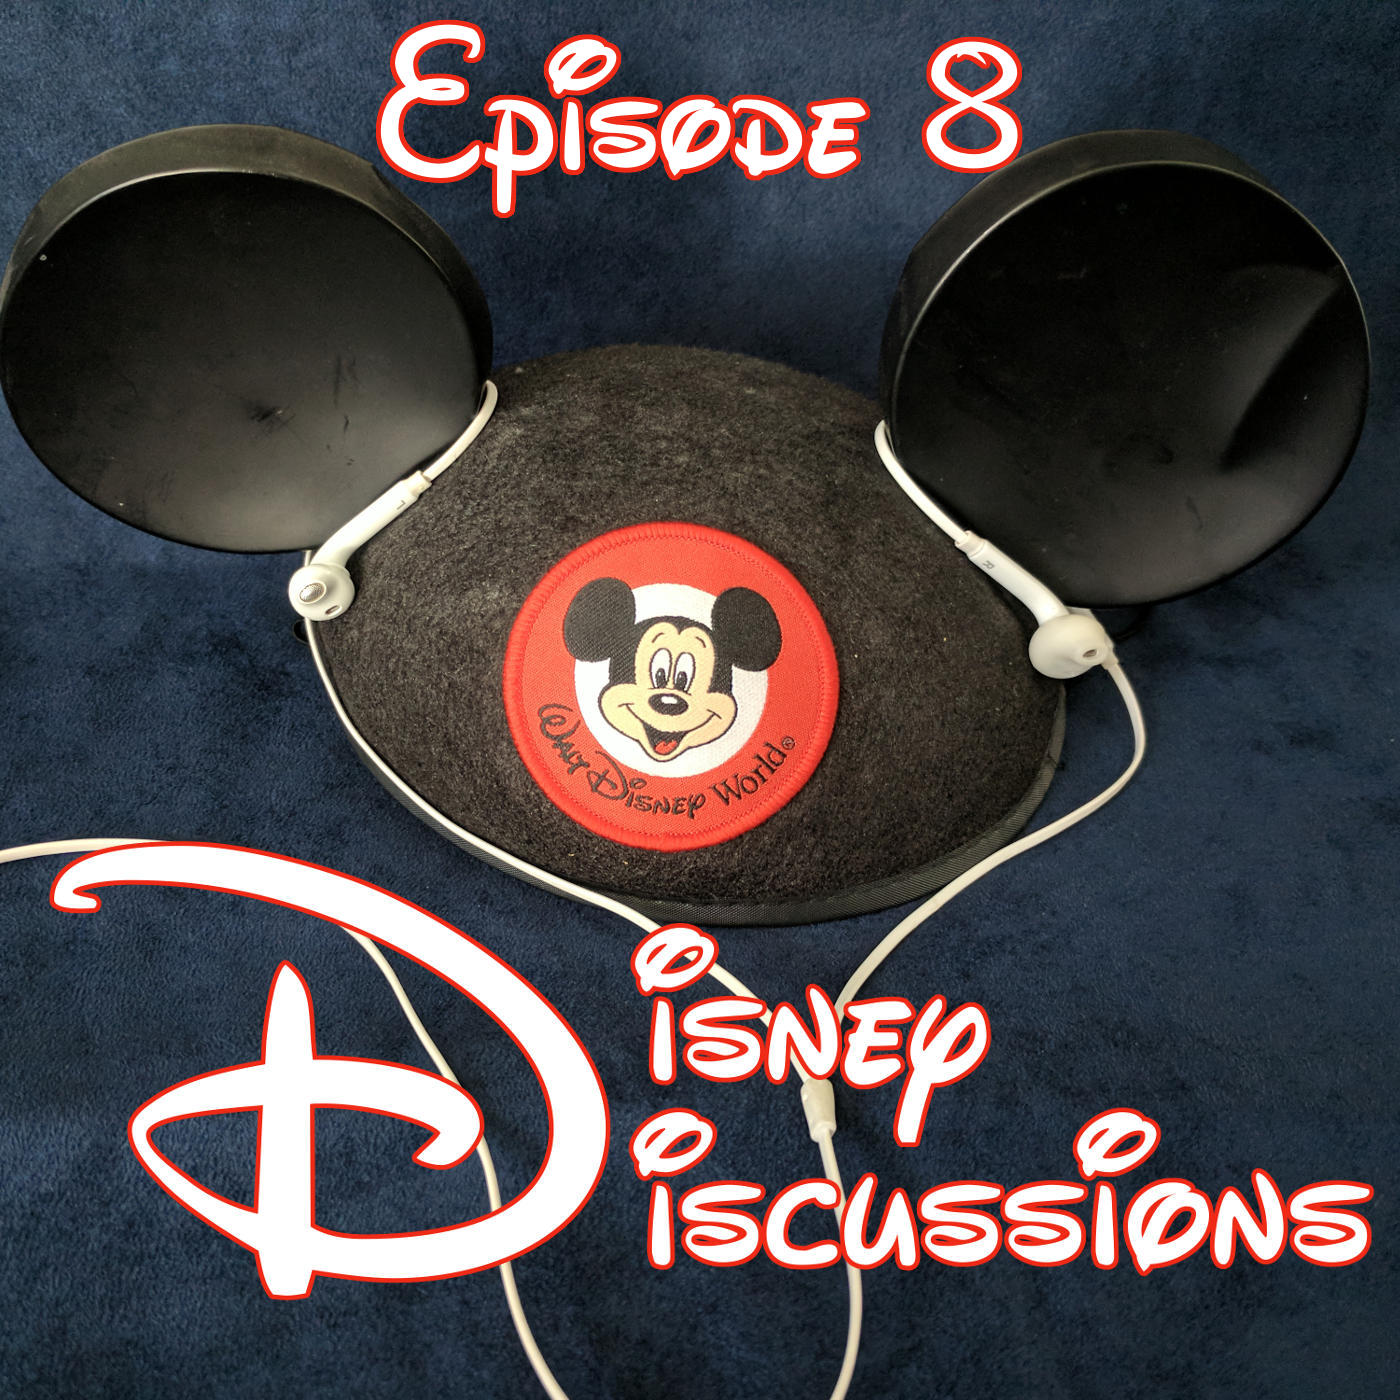 Episode 8 Star Wars Rebels season 4, Mission Force One, new Disney room features, bye-bye Gigantic, The Black Panther Trailer and more - Disney Discussions